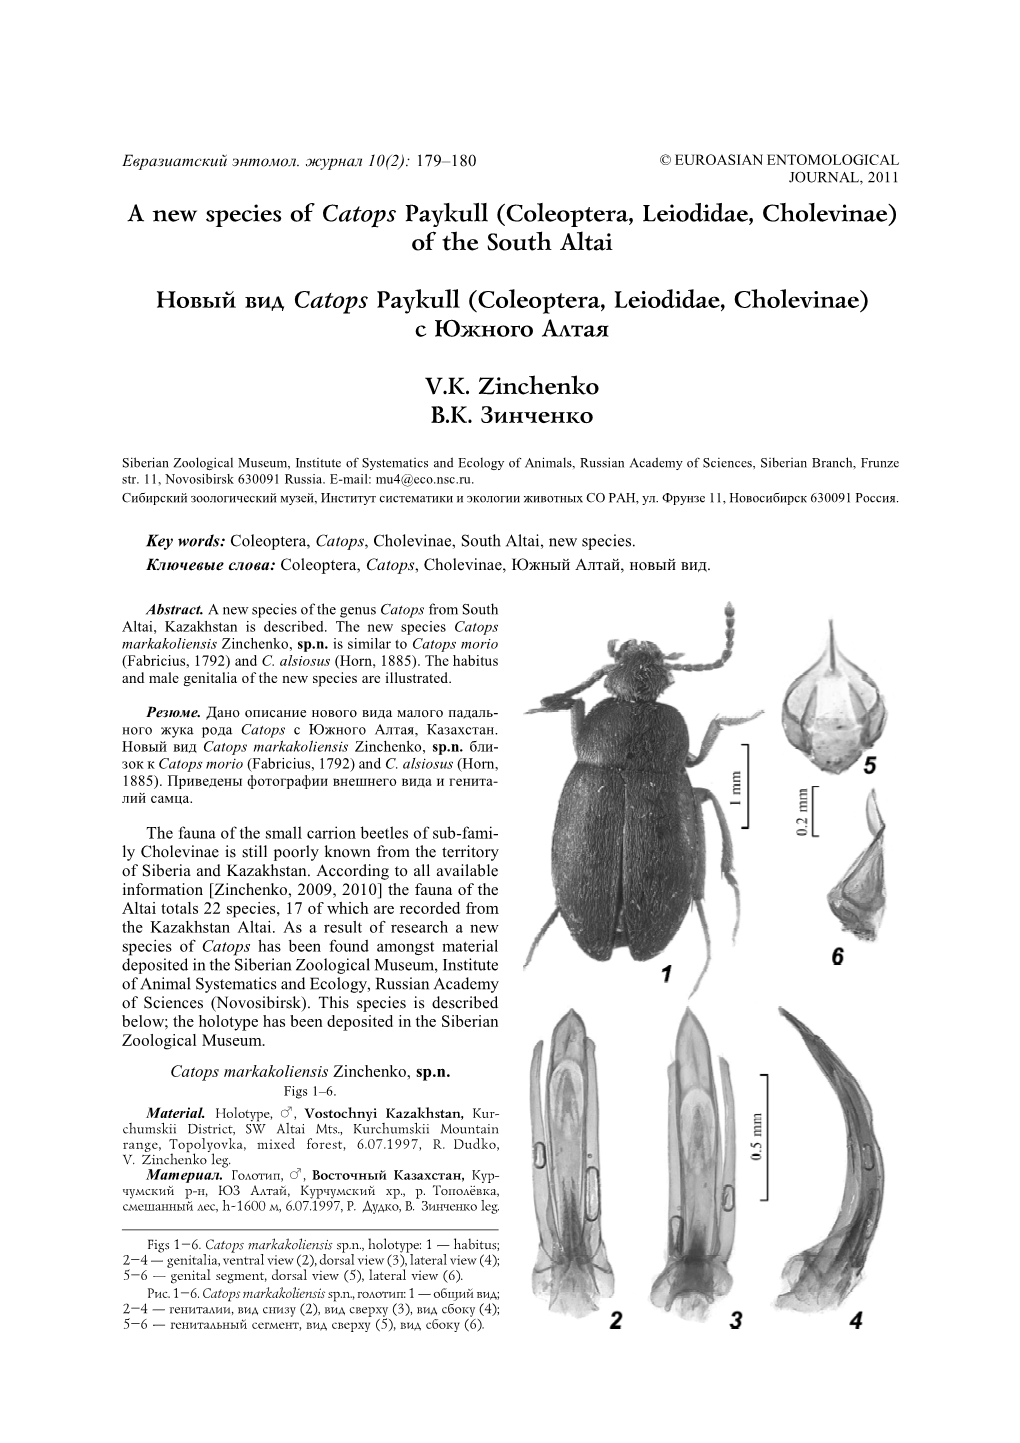 A New Species of Catops Paykull (Coleoptera, Leiodidae, Cholevinae) of the South Altai